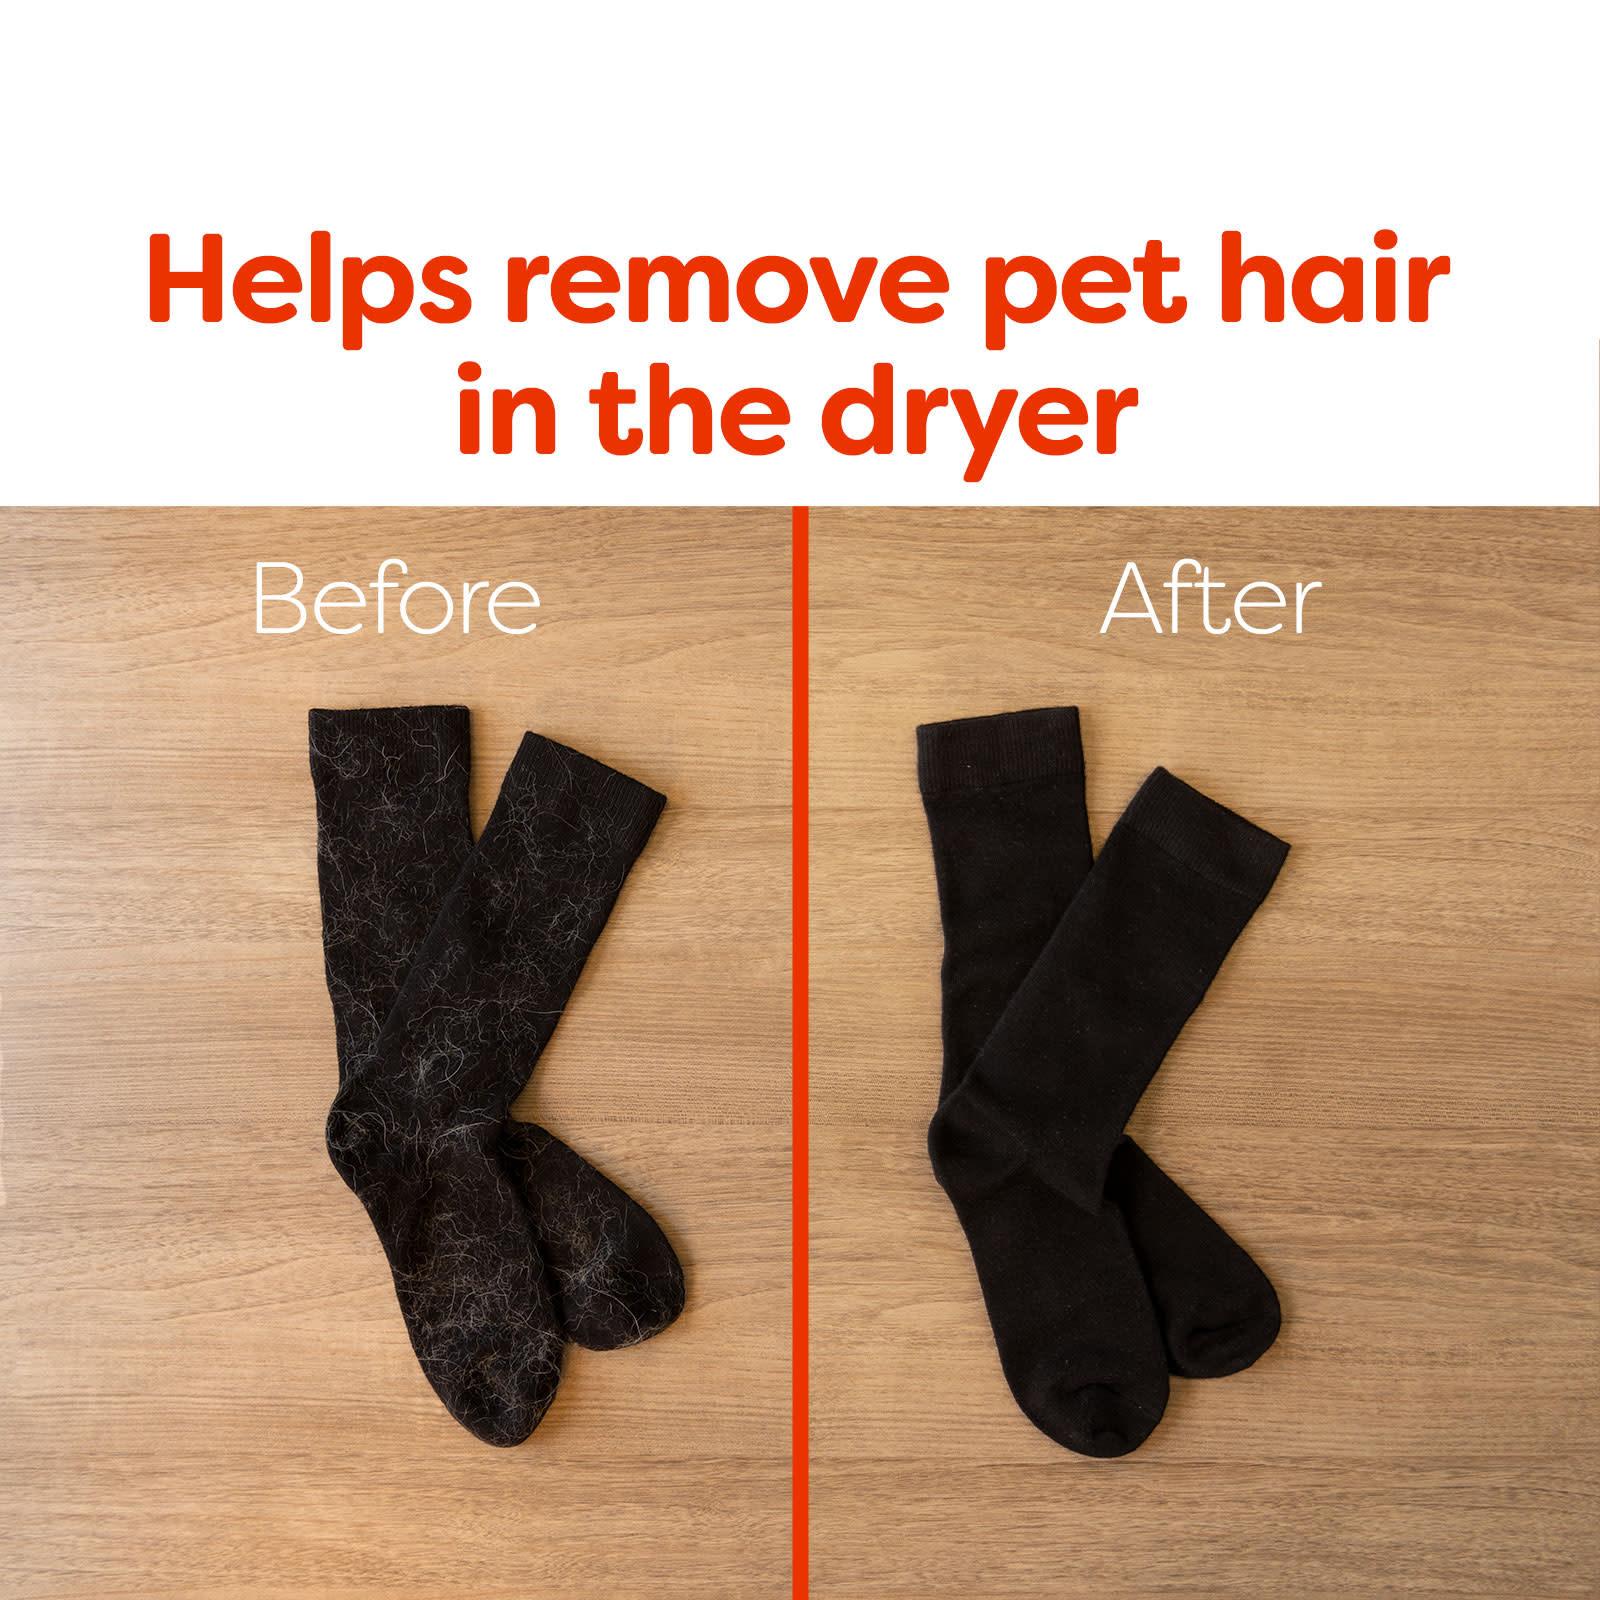 Bounce Pet Hair Dryer Sheets: Helps remove pet hair in the dryer